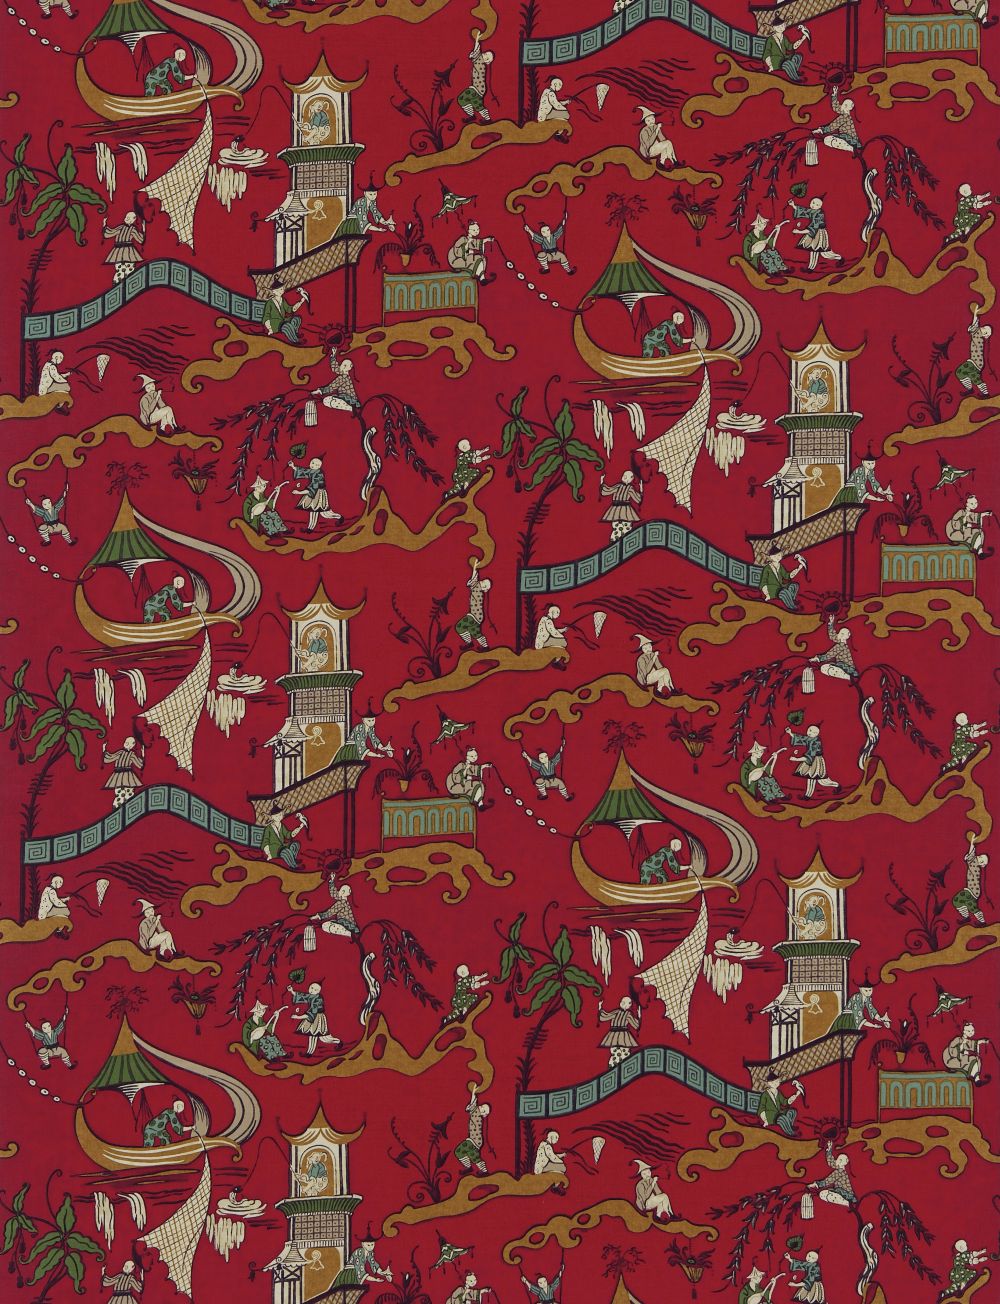 Pagoda River Fabric - Red / Gold - by Sanderson